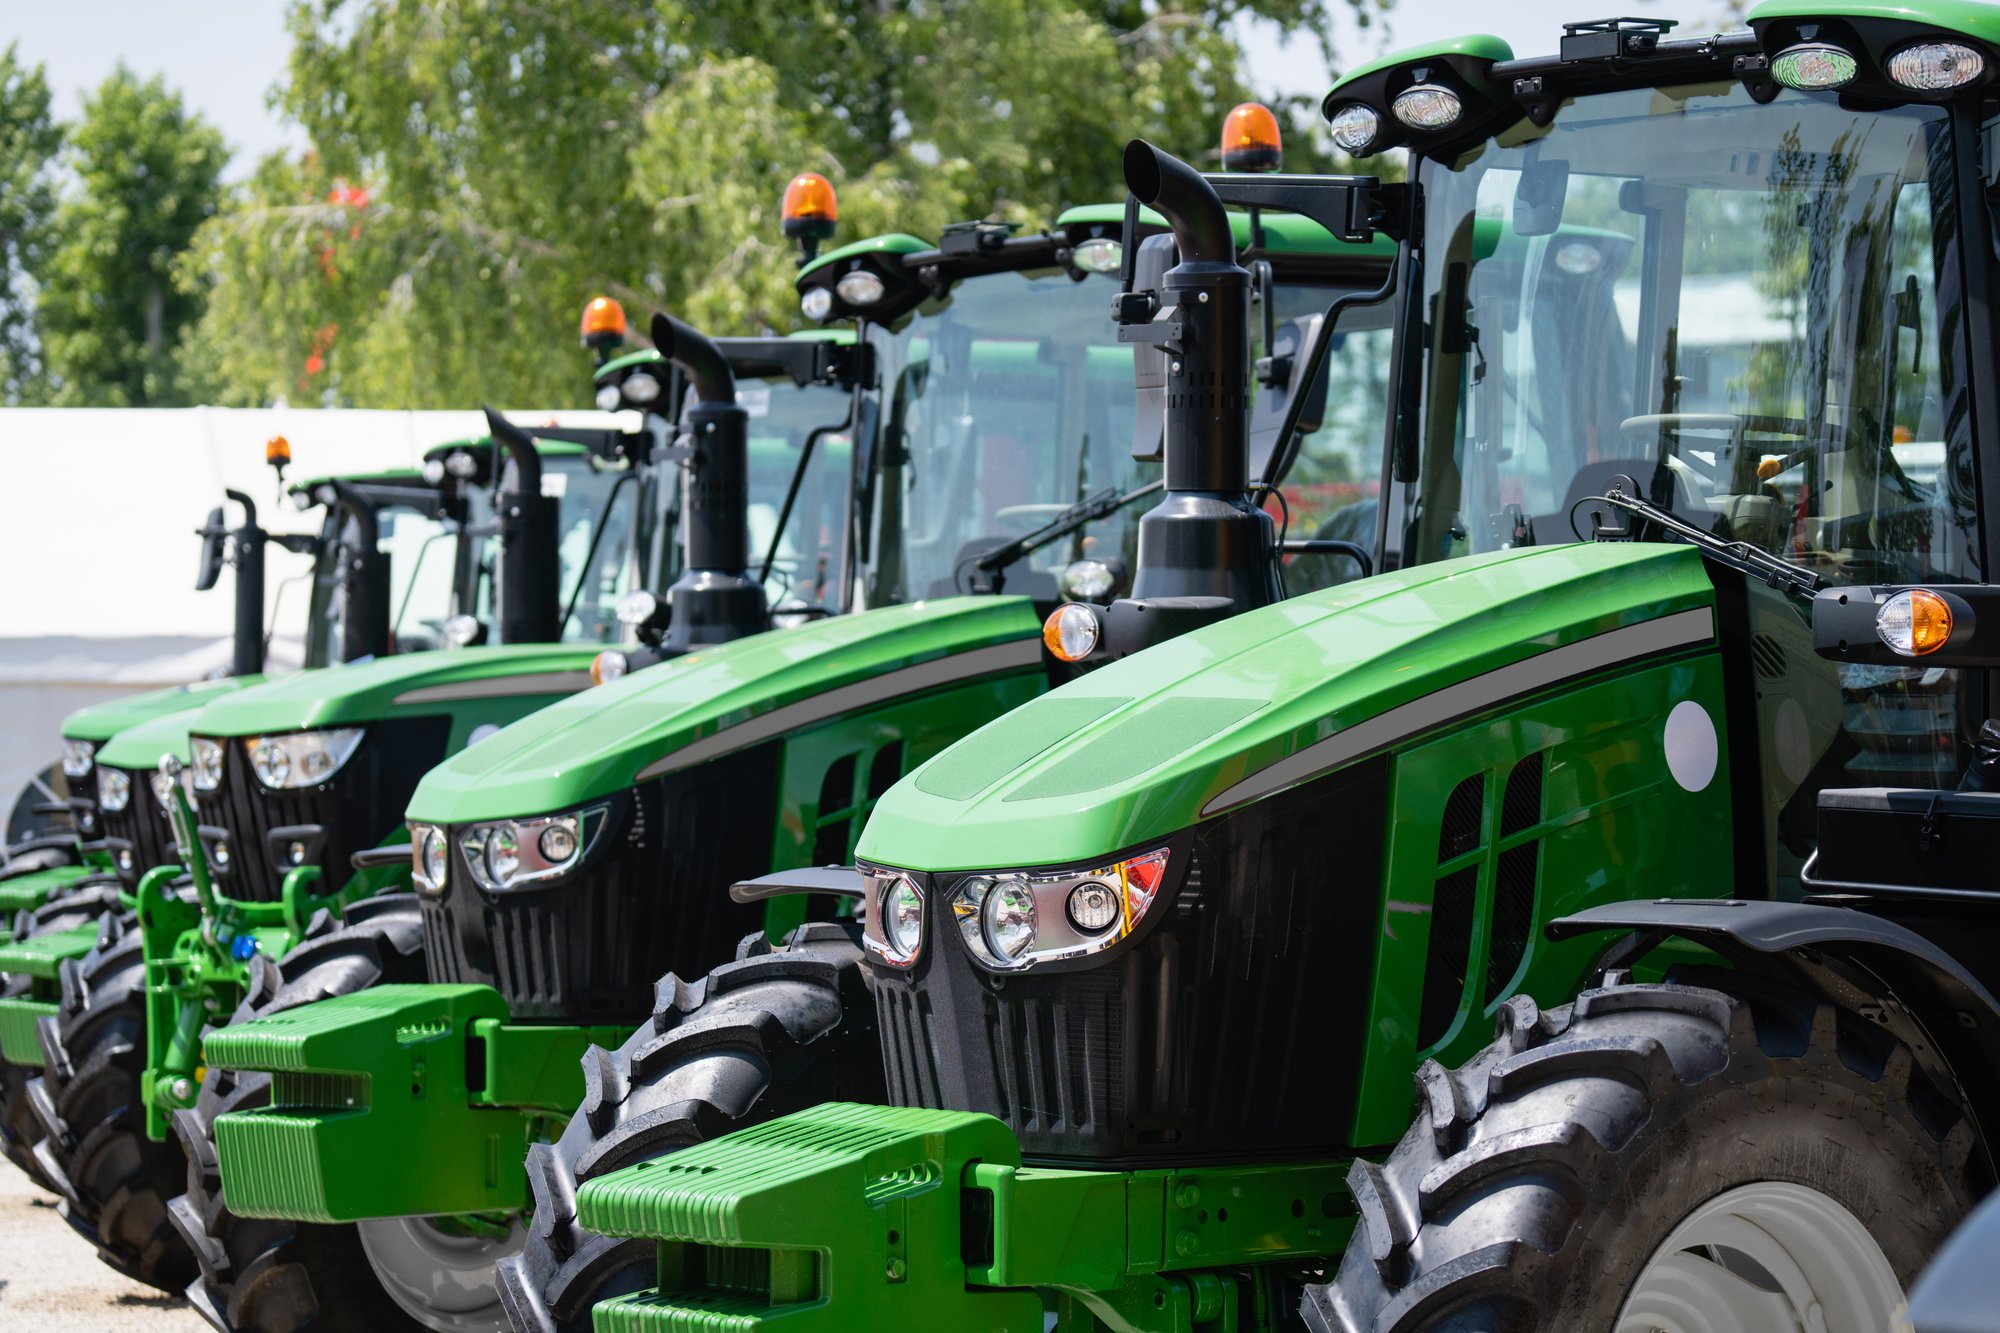 Row of advanced green tractors equipped with monitoring and safety features, lined up and ready for use. Each tractor showcases the integration of asset protection and monitoring technology, ideal for securing valuable agricultural equipment.